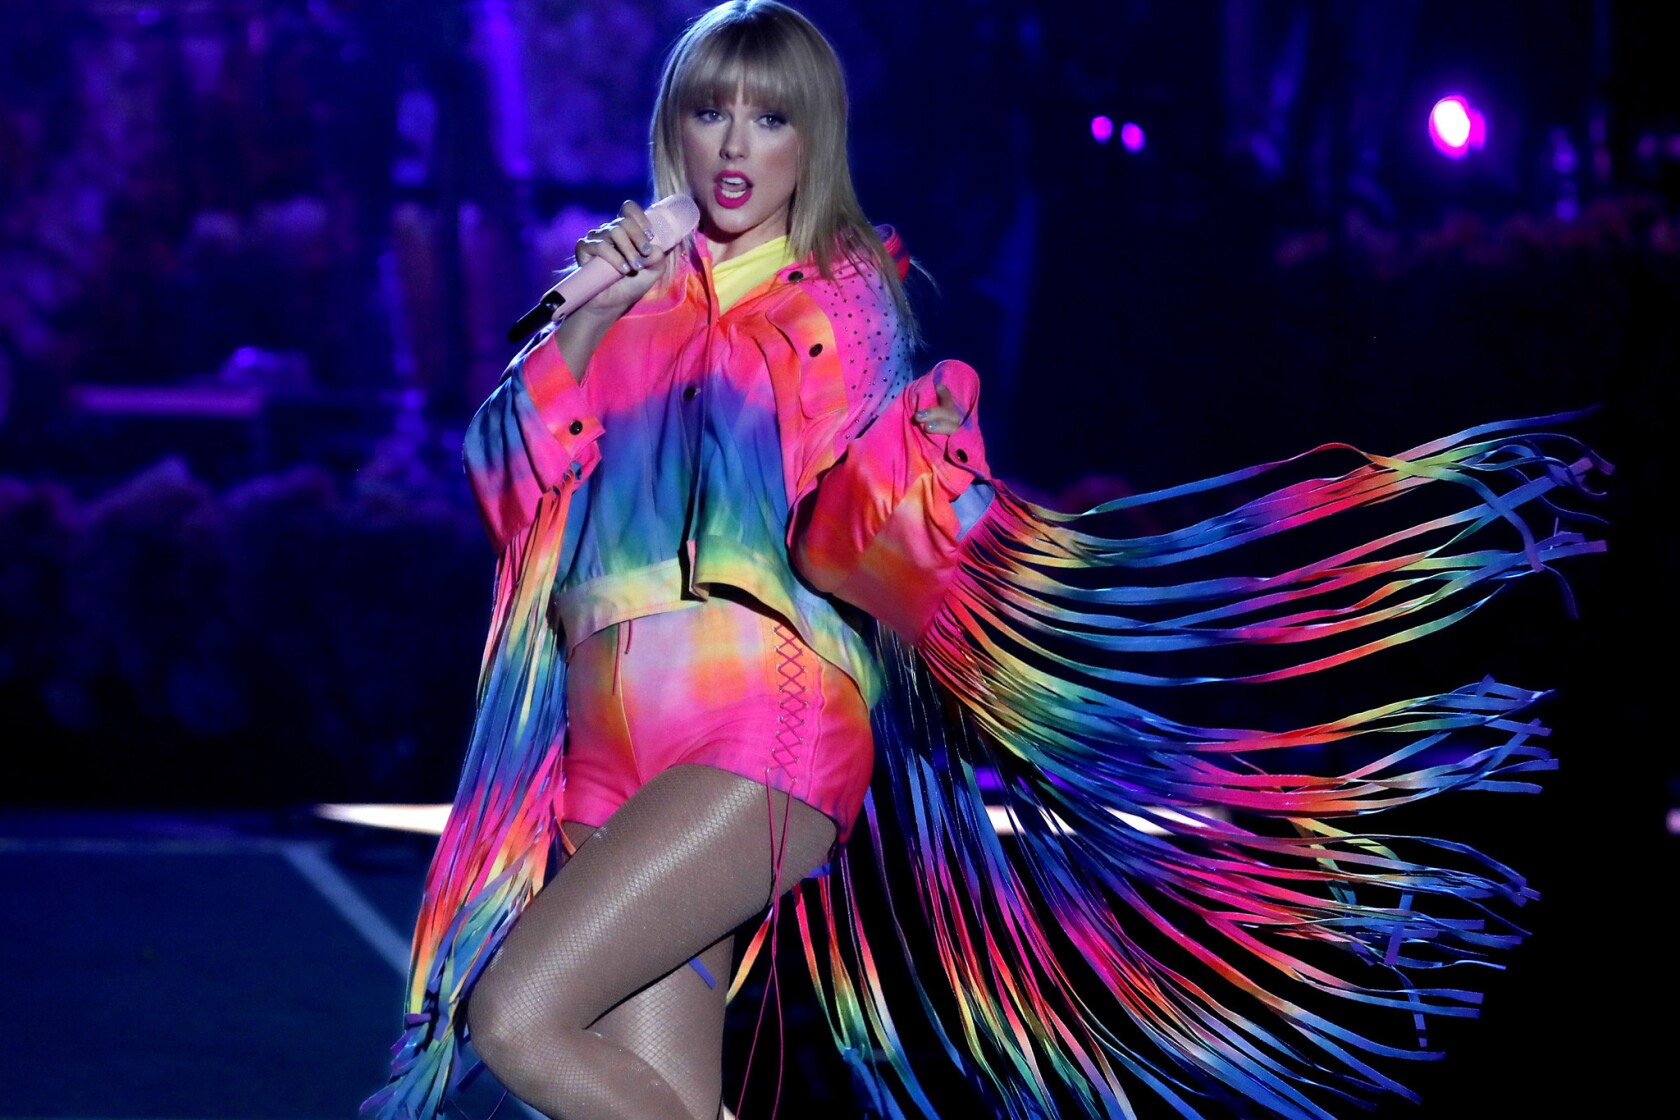 Taylor Swift Celebrates Pride Month And Her Catalog Of Hits